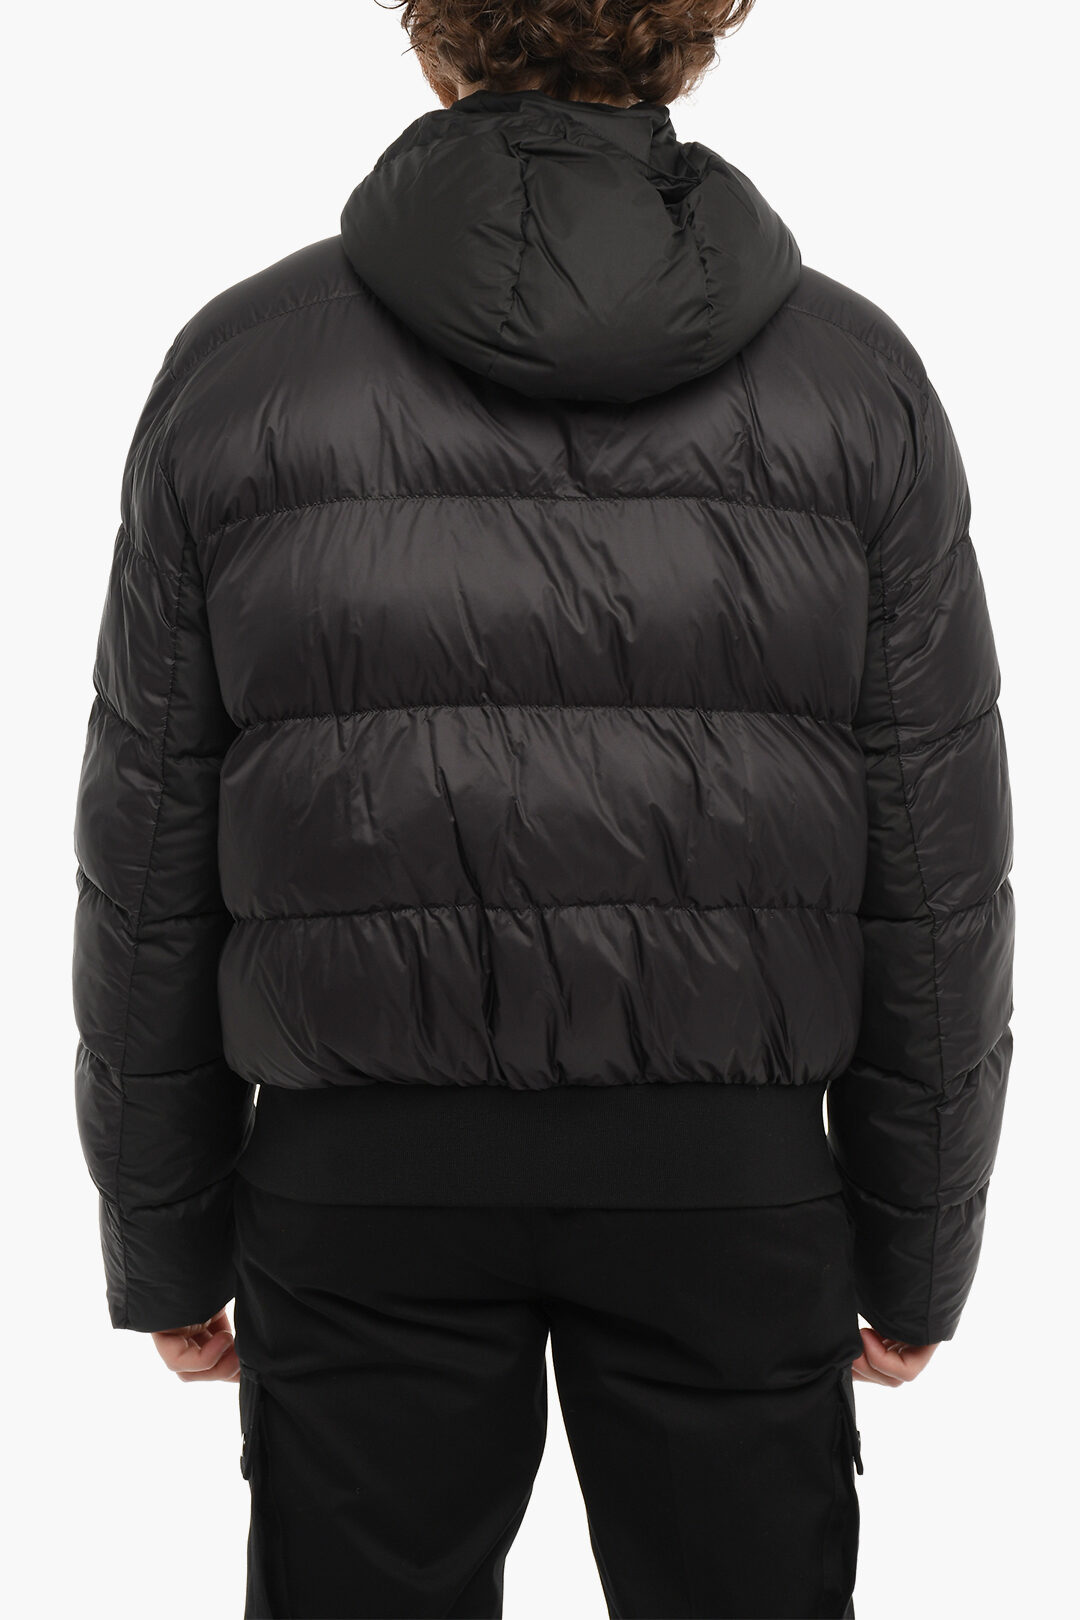 Neil Barrett PENFIELD Padded Bomber Jacket with Removable Chest Piece ...